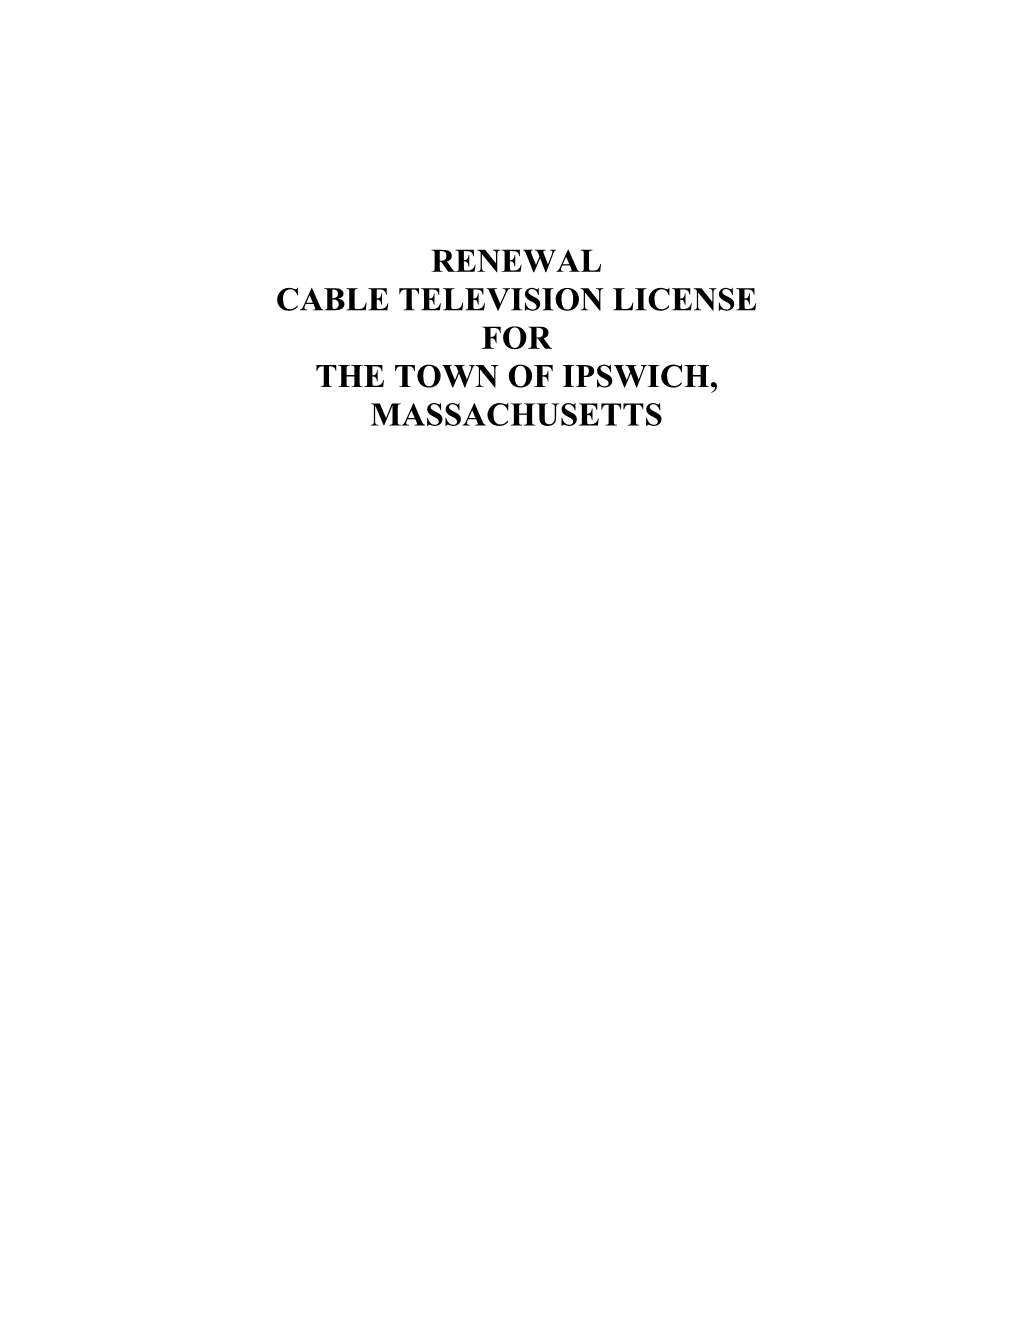 RENEWAL CABLE TELEVISION LICENSE for the TOWN of IPSWICH, MASSACHUSETTS Ipswich, MA TABLE of CONTENTS PAGE INTRODUCTION